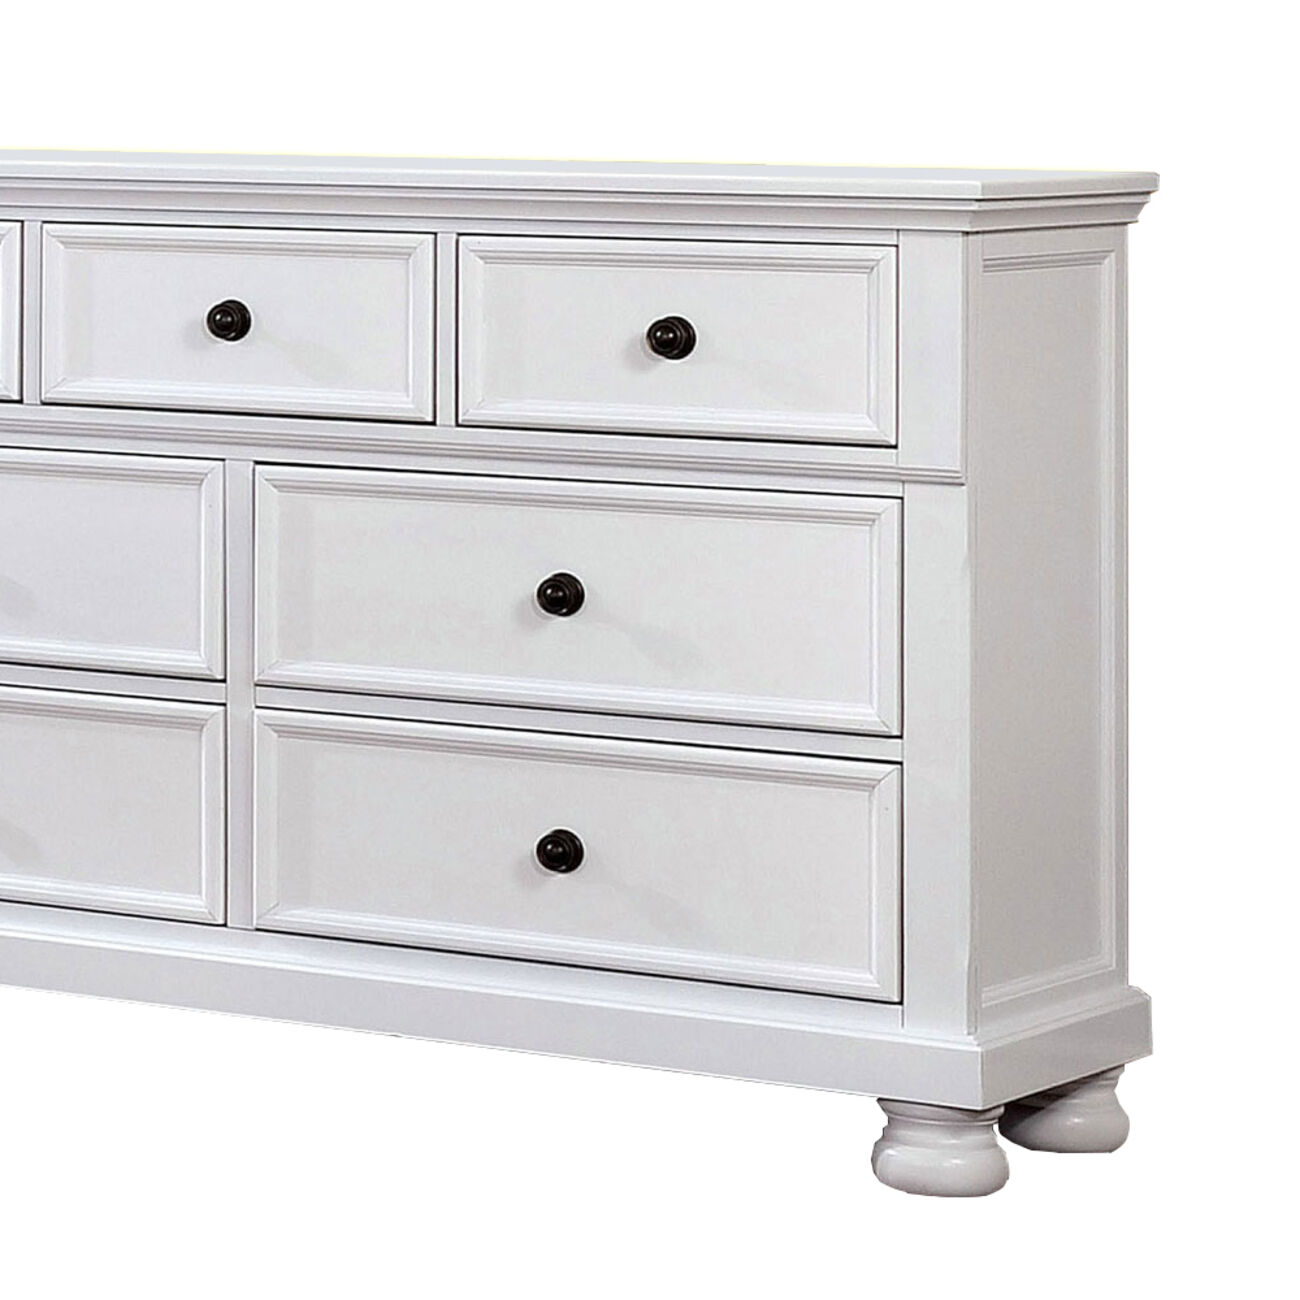 Transitional Wooden Dresser with 7 Drawers and Bun Feet, White